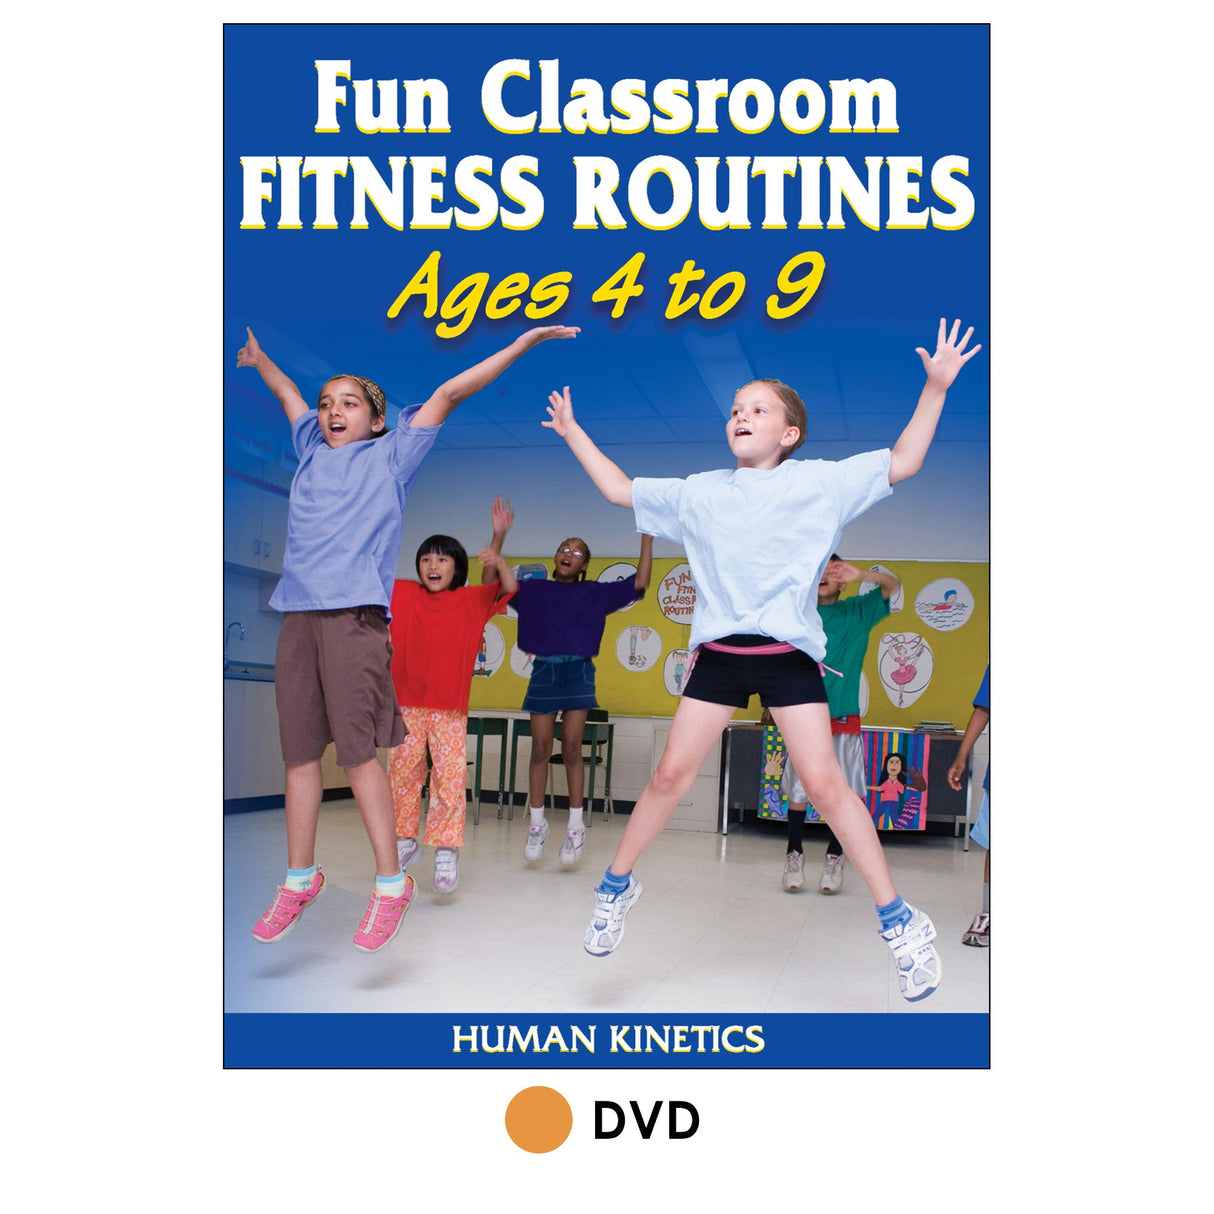 Fun Classroom Fitness Routines Ages 4-9 DVD